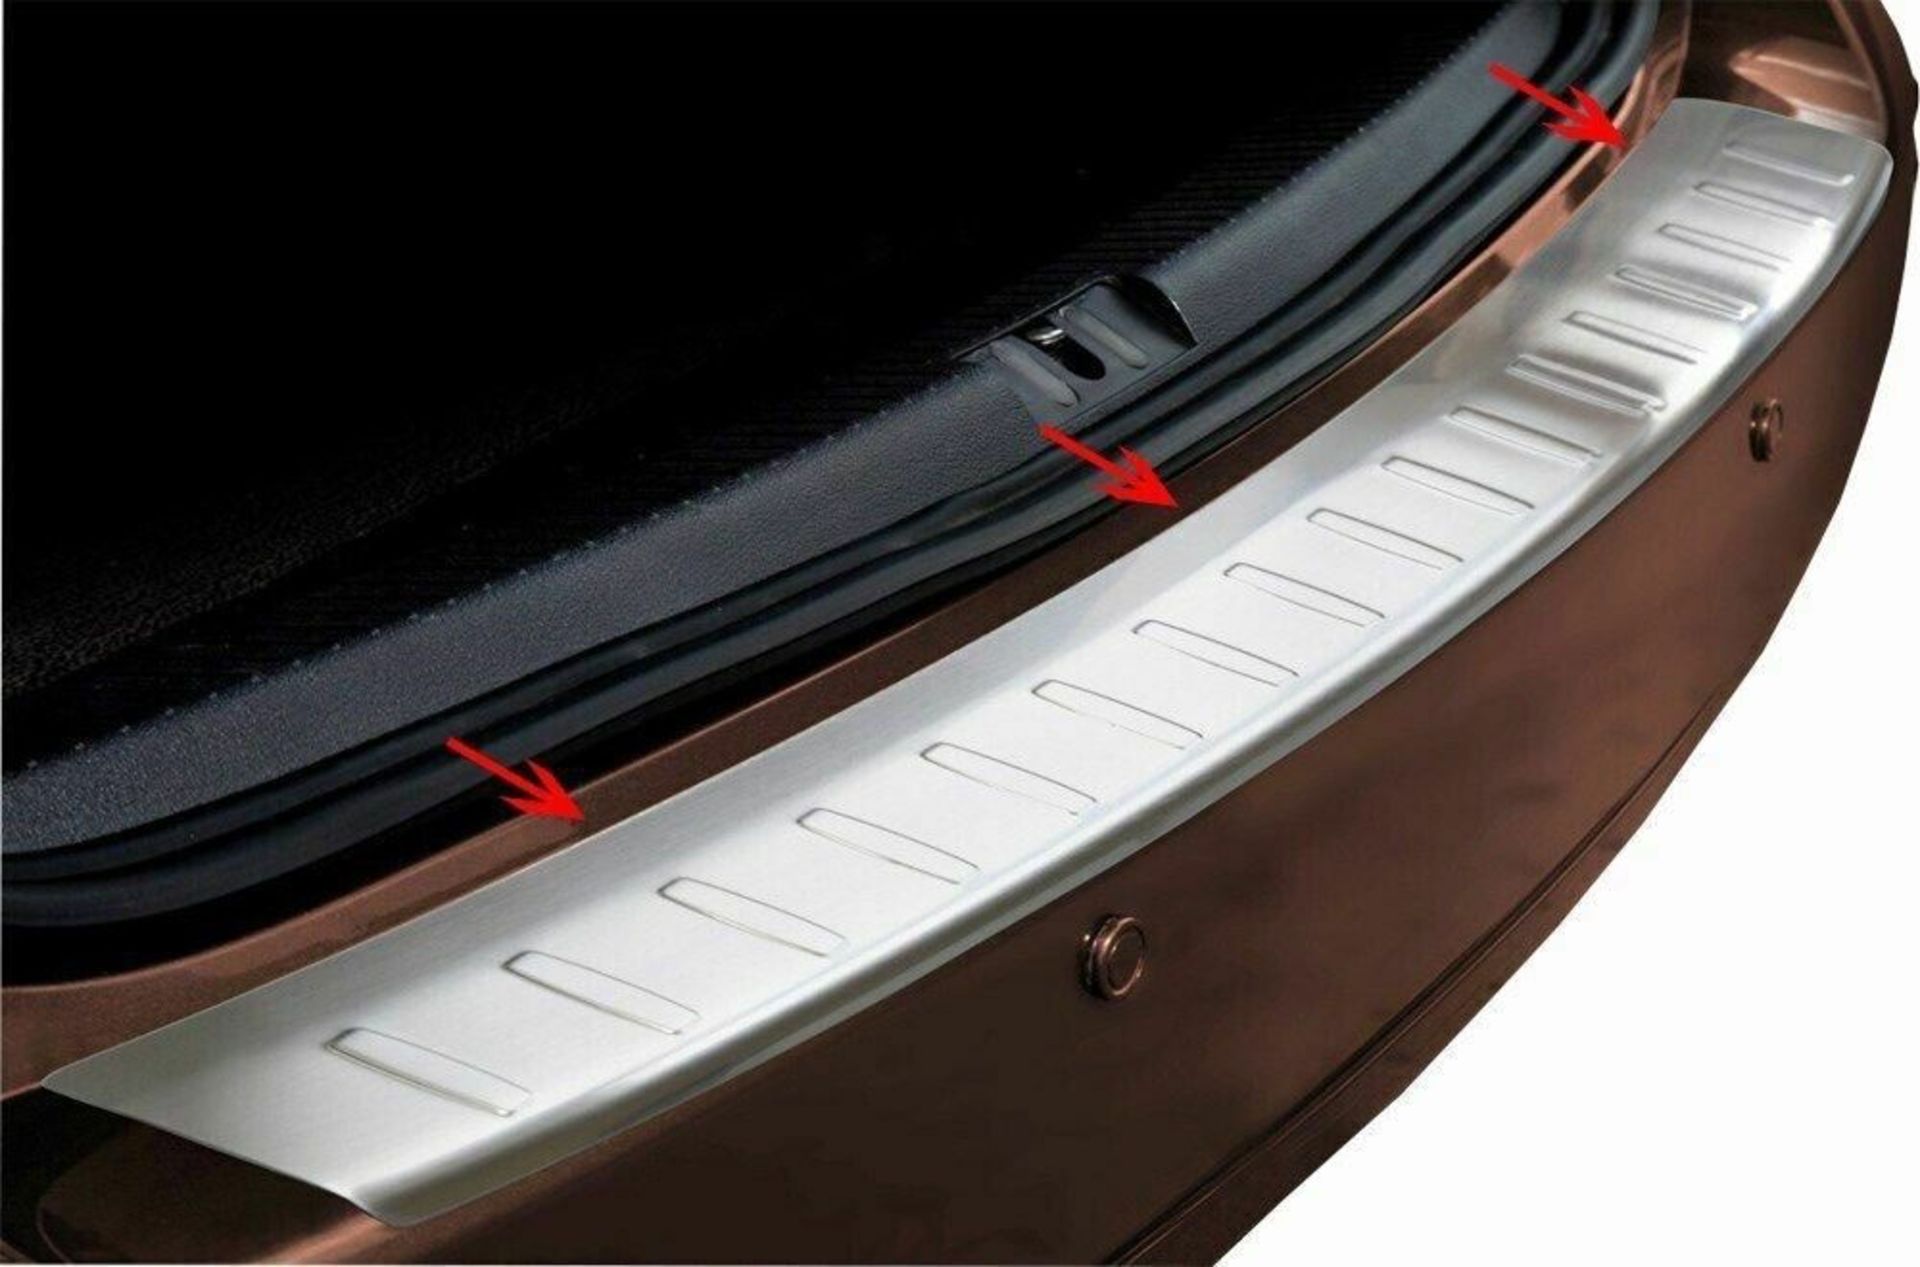 100 X LOTS VW TOURAN MK2 1T3 2010-2014 STAINLESS STEEL REAR BUMPER PROTECTOR, SCRATCH GUARD - Image 3 of 5